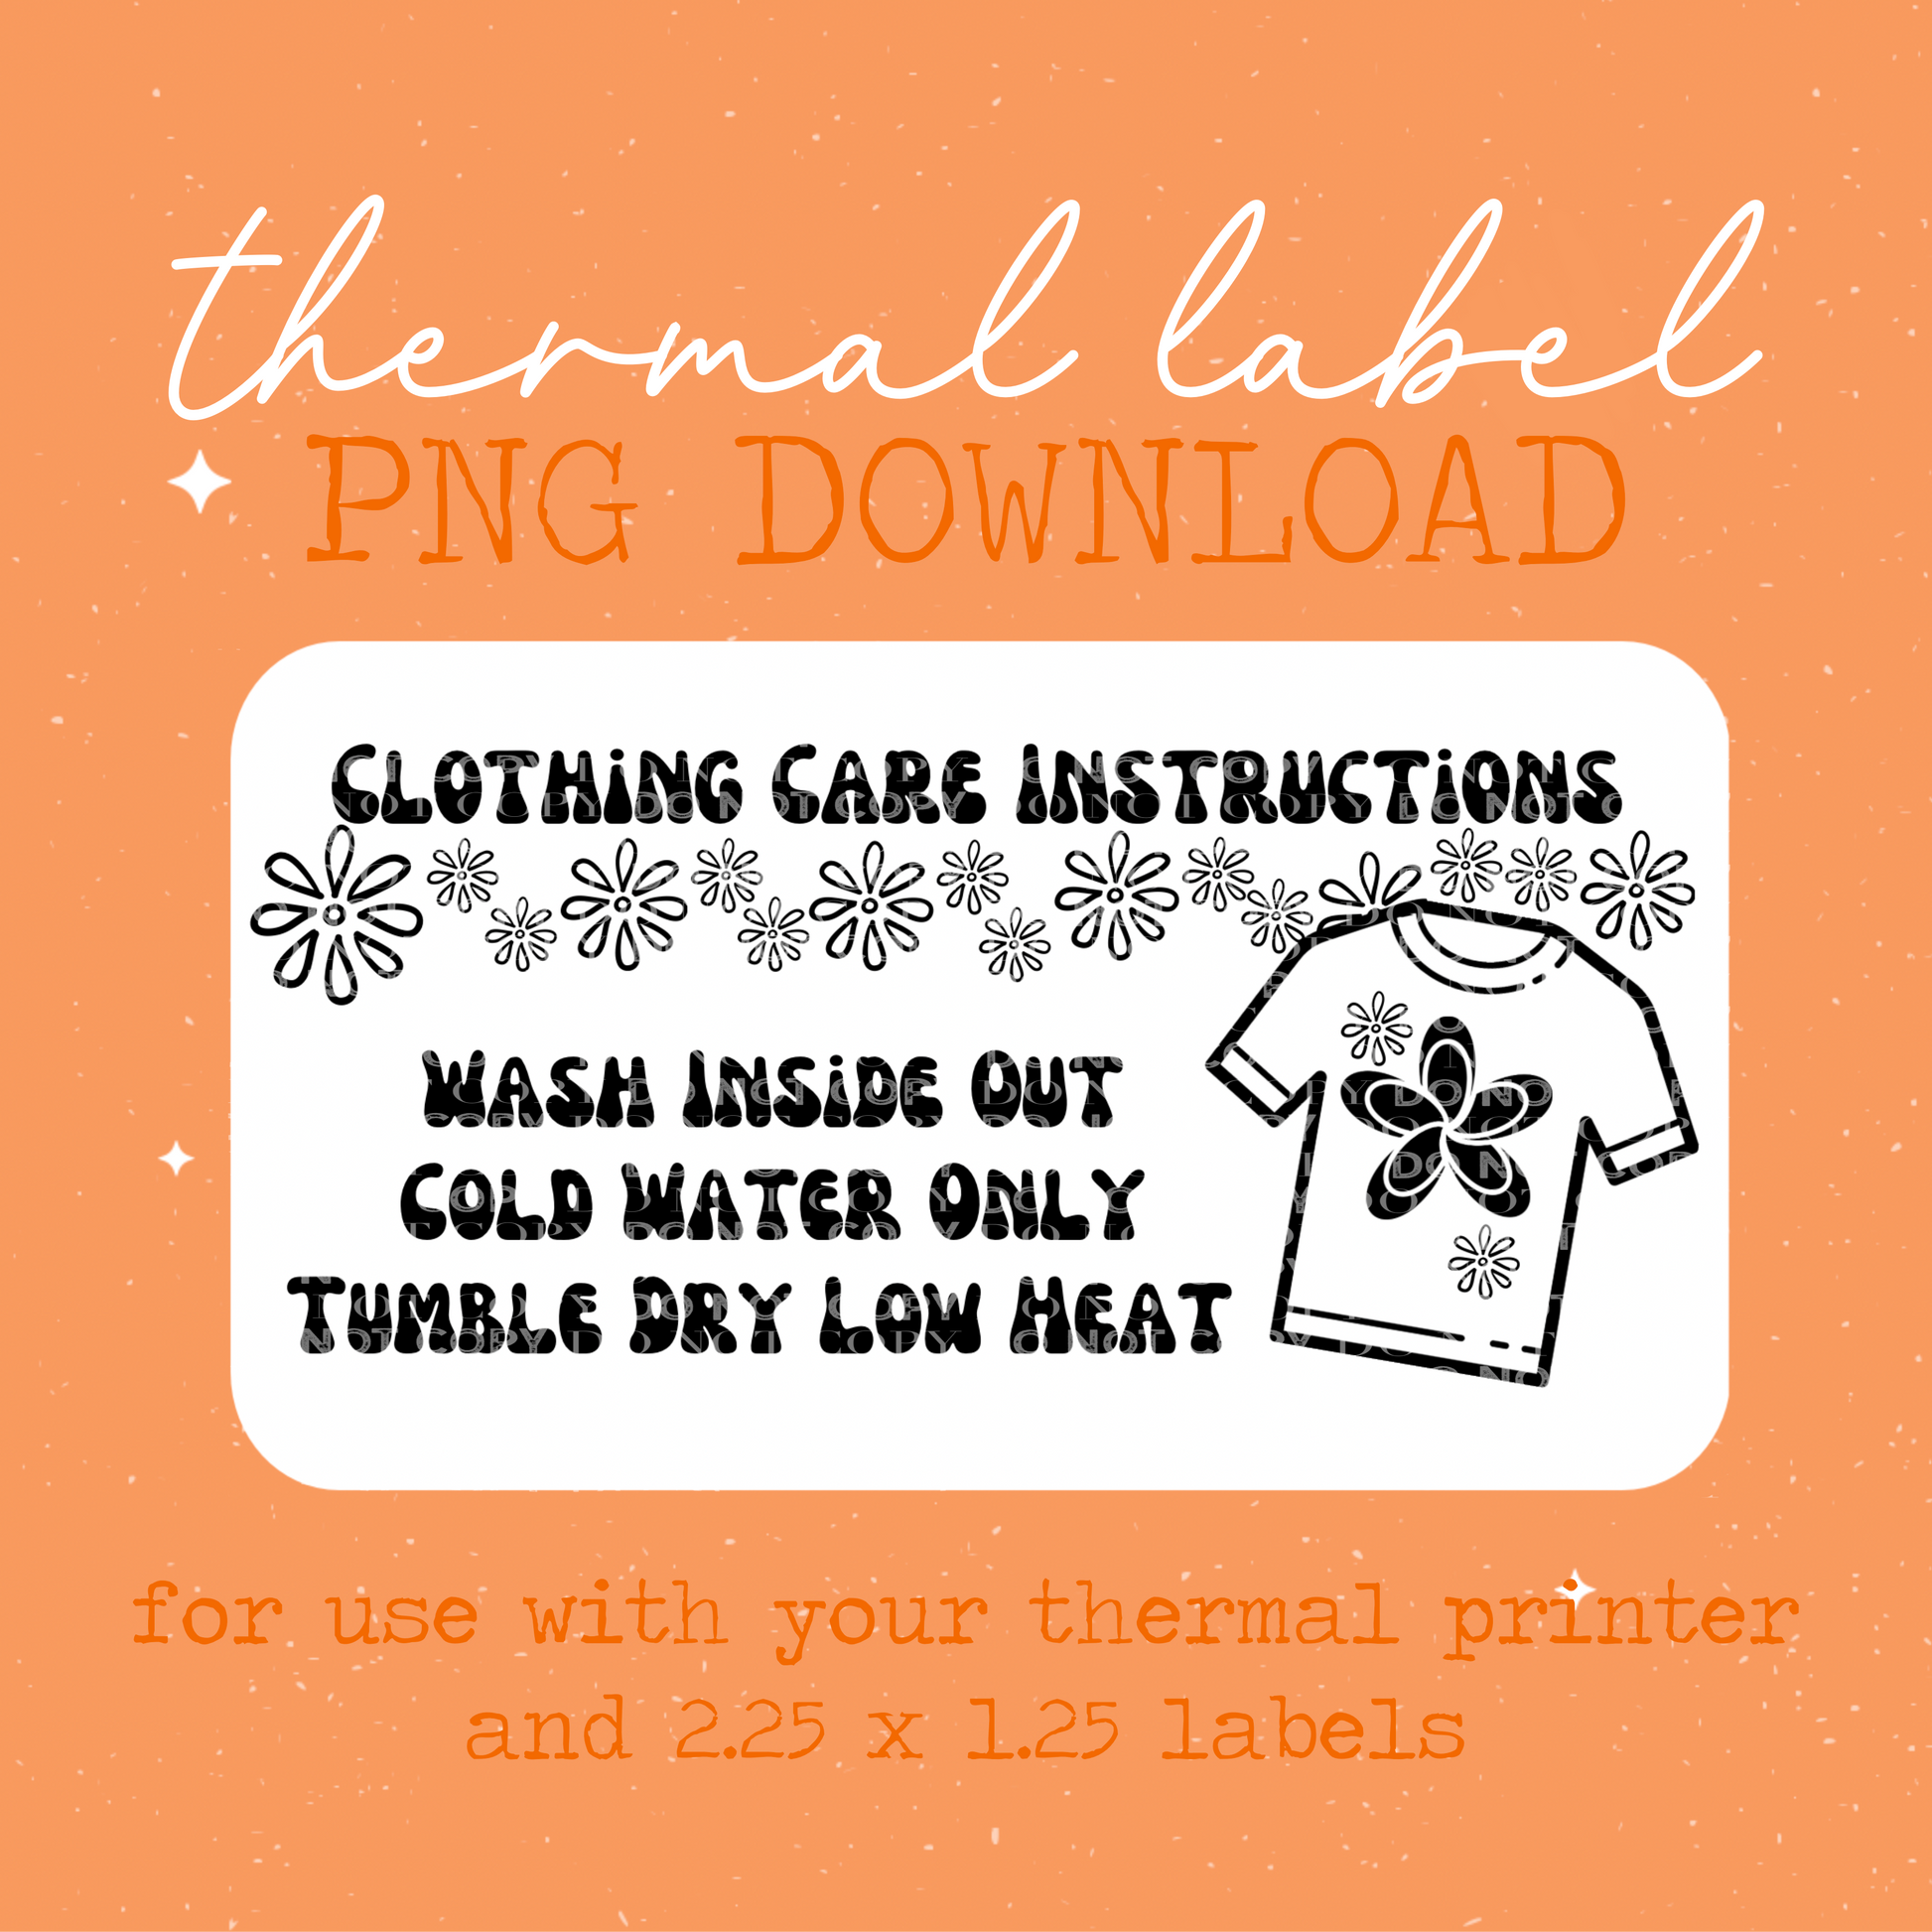 How to Wash and Care for Modal Clothes